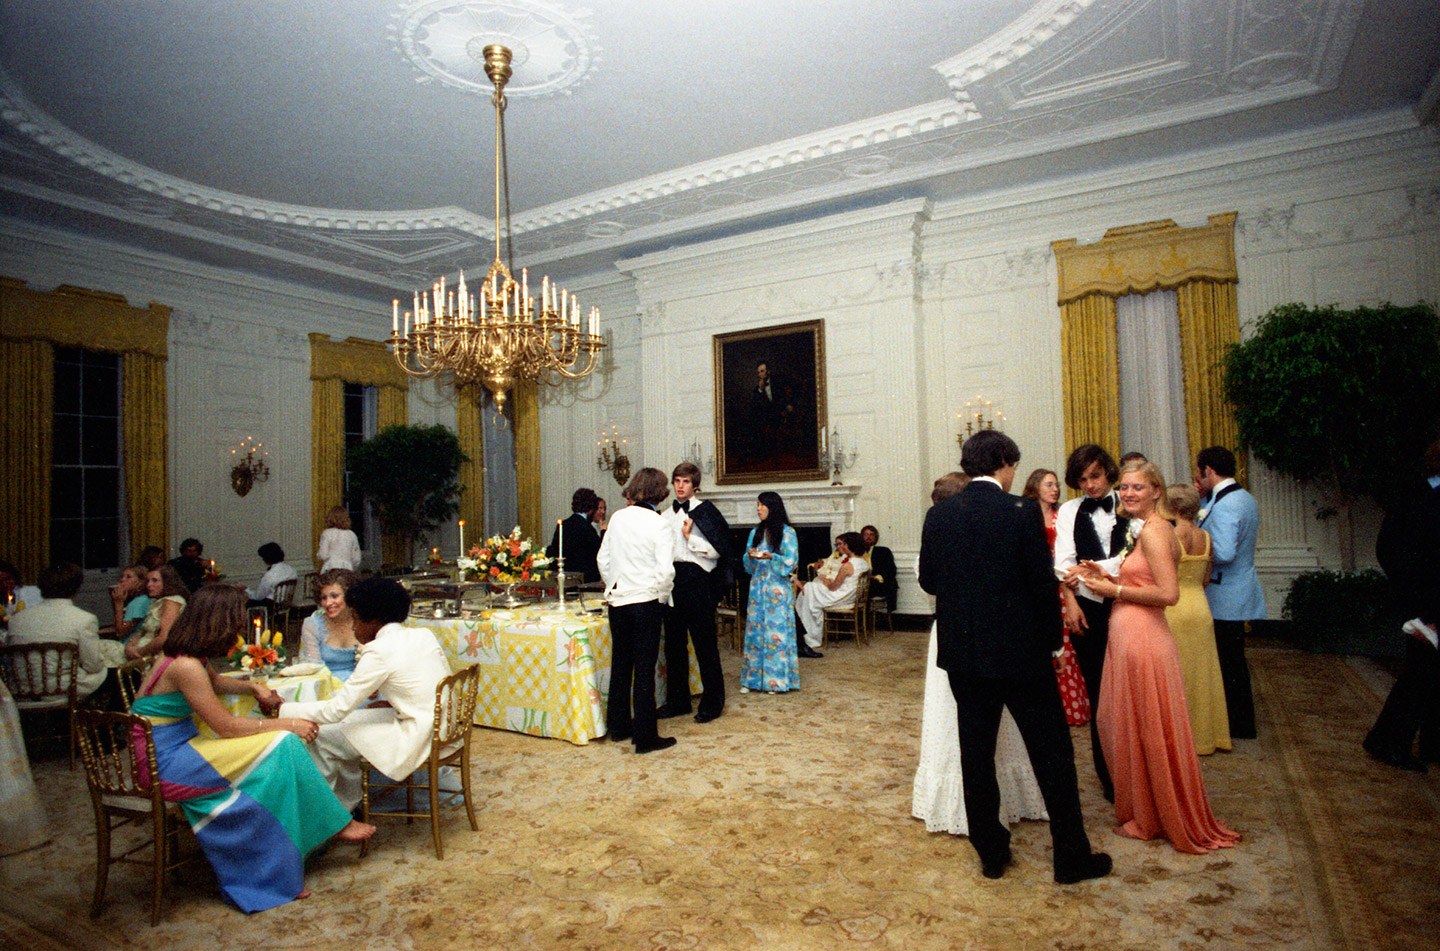 Prom at the White House